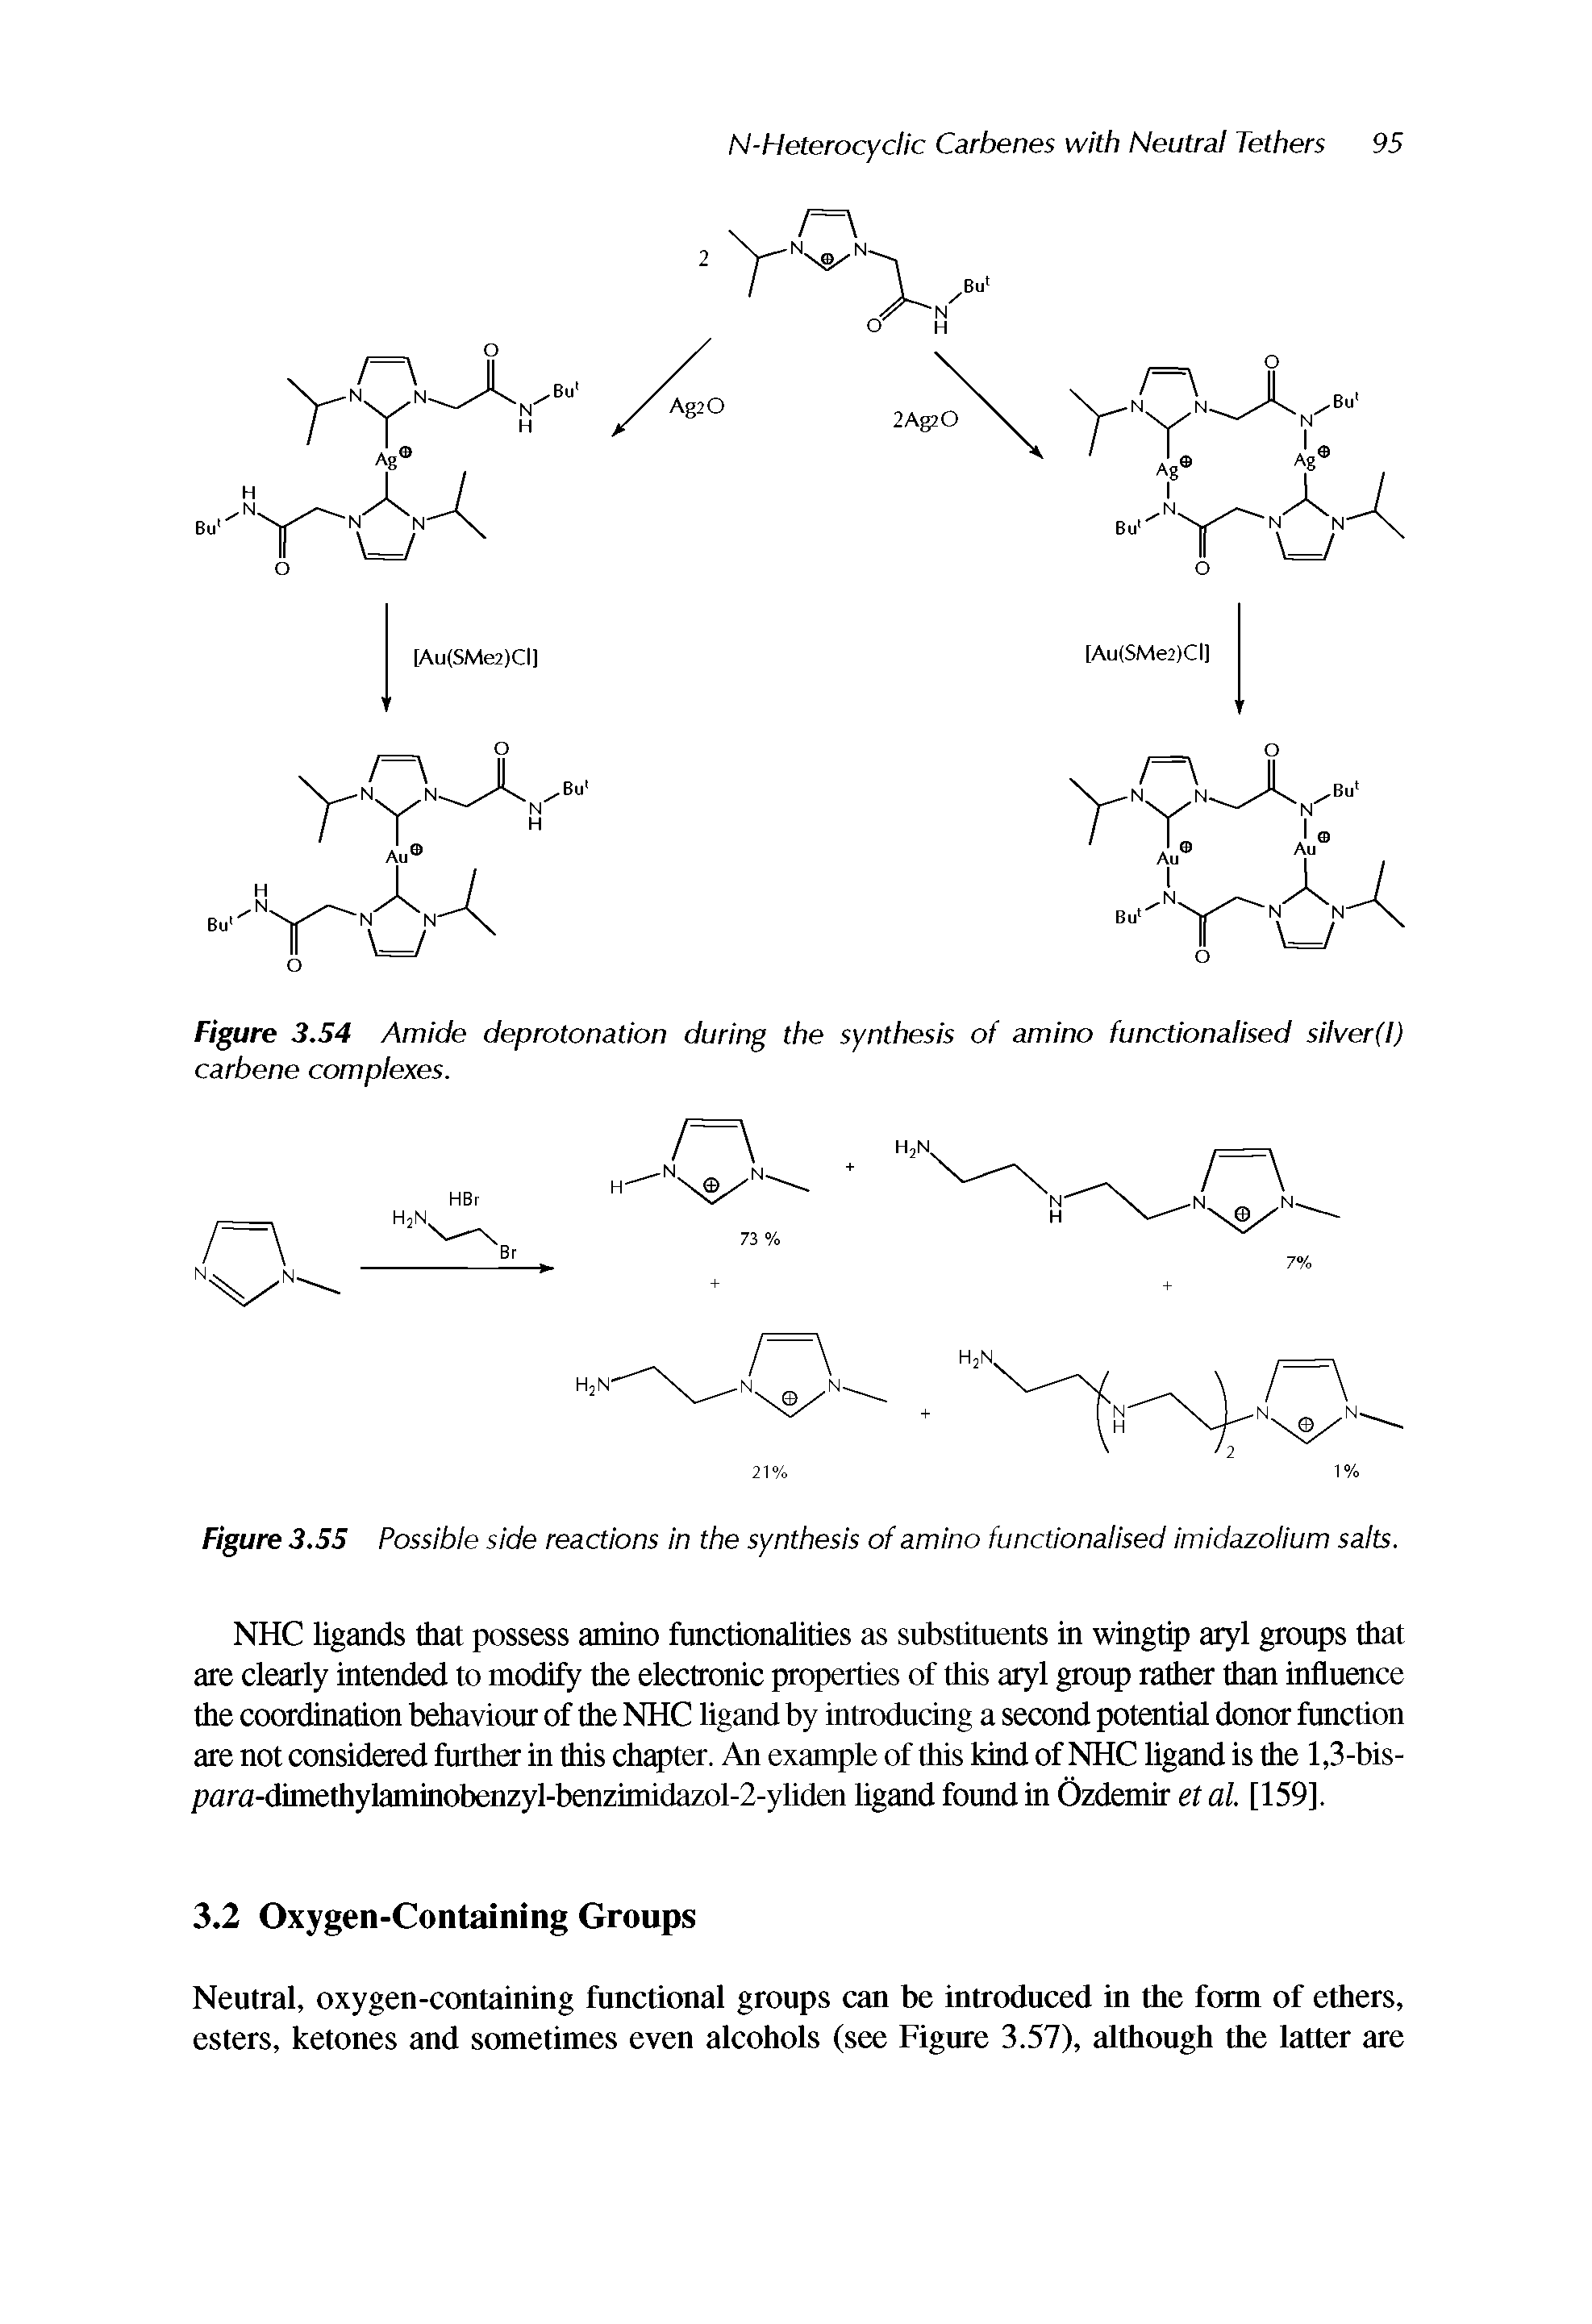 Figure 3.55 Possible side reactions in the synthesis of amino functionalised imidazolium salts.